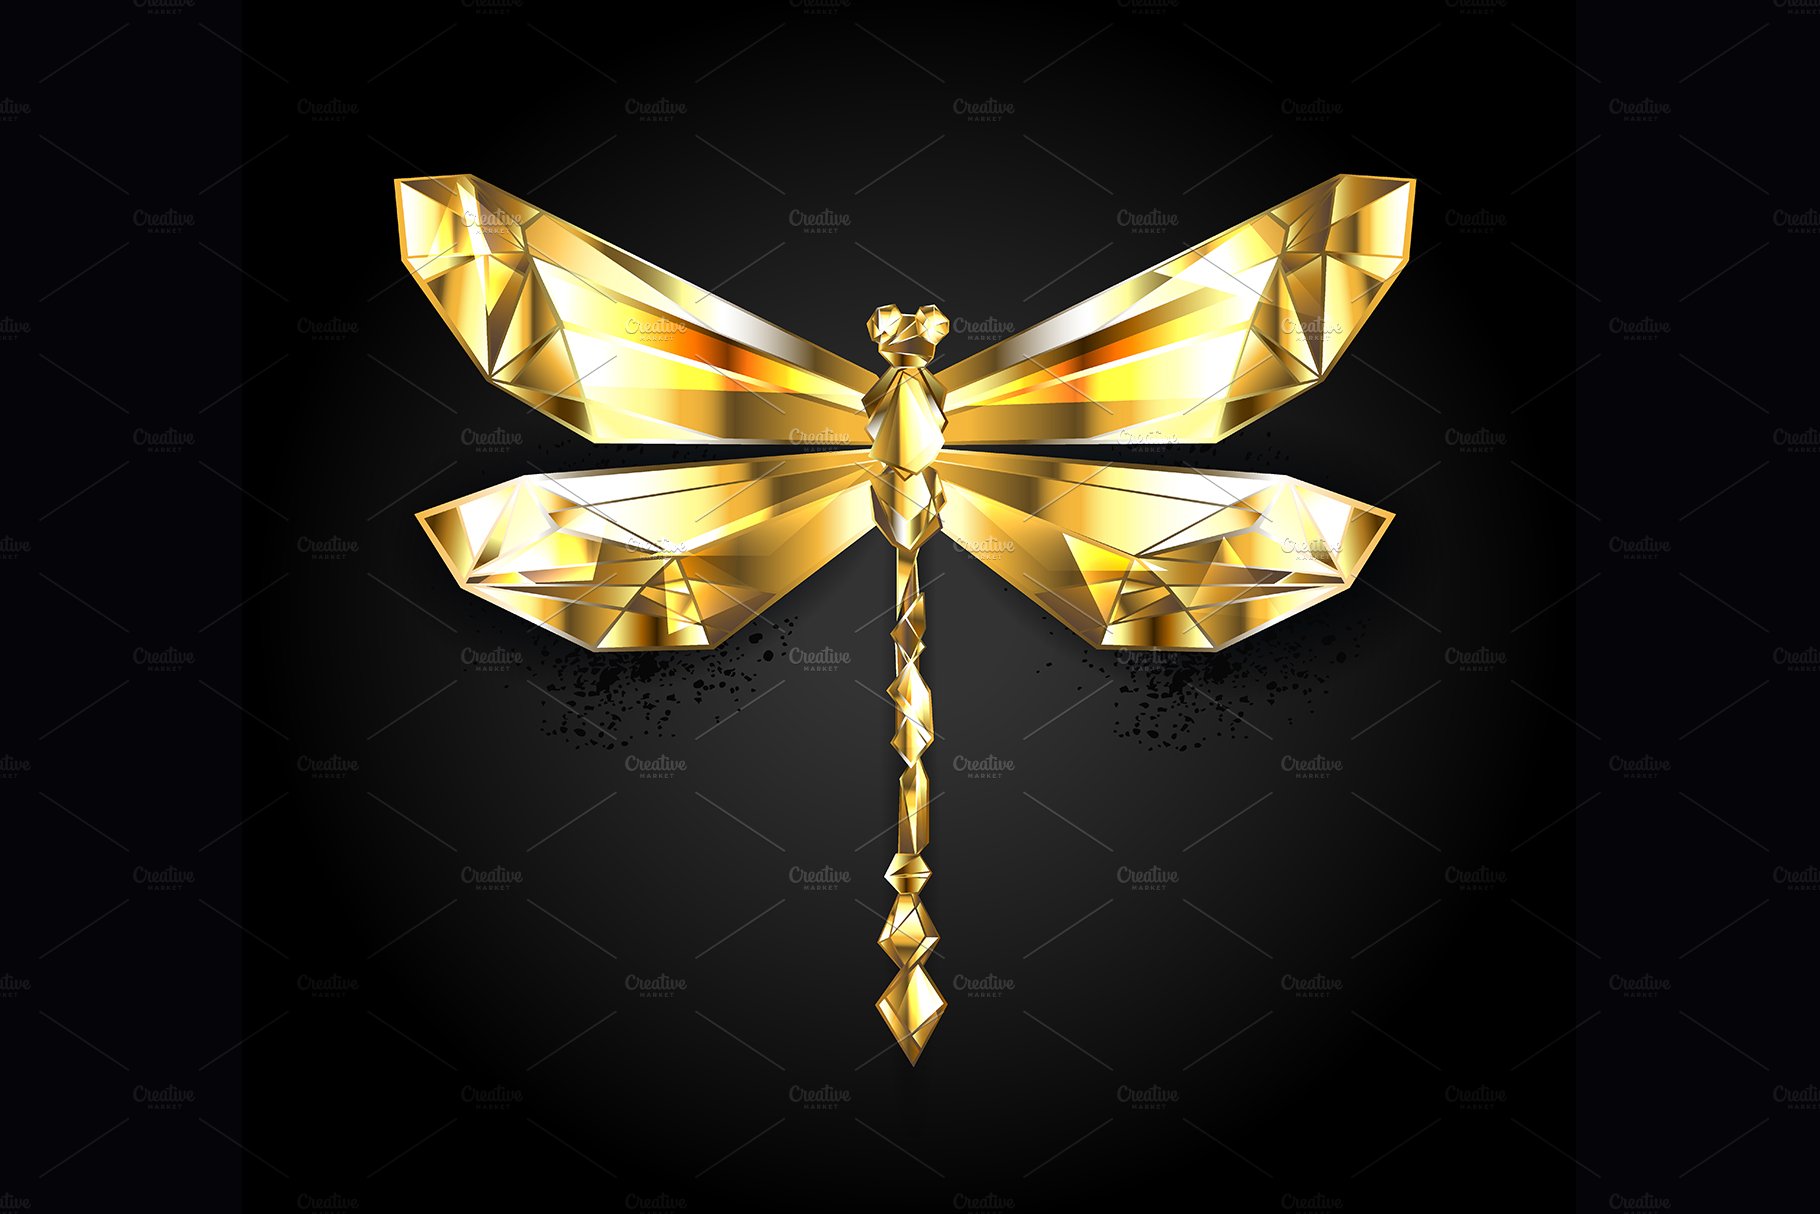 Gold Polygonal Dragonfly cover image.